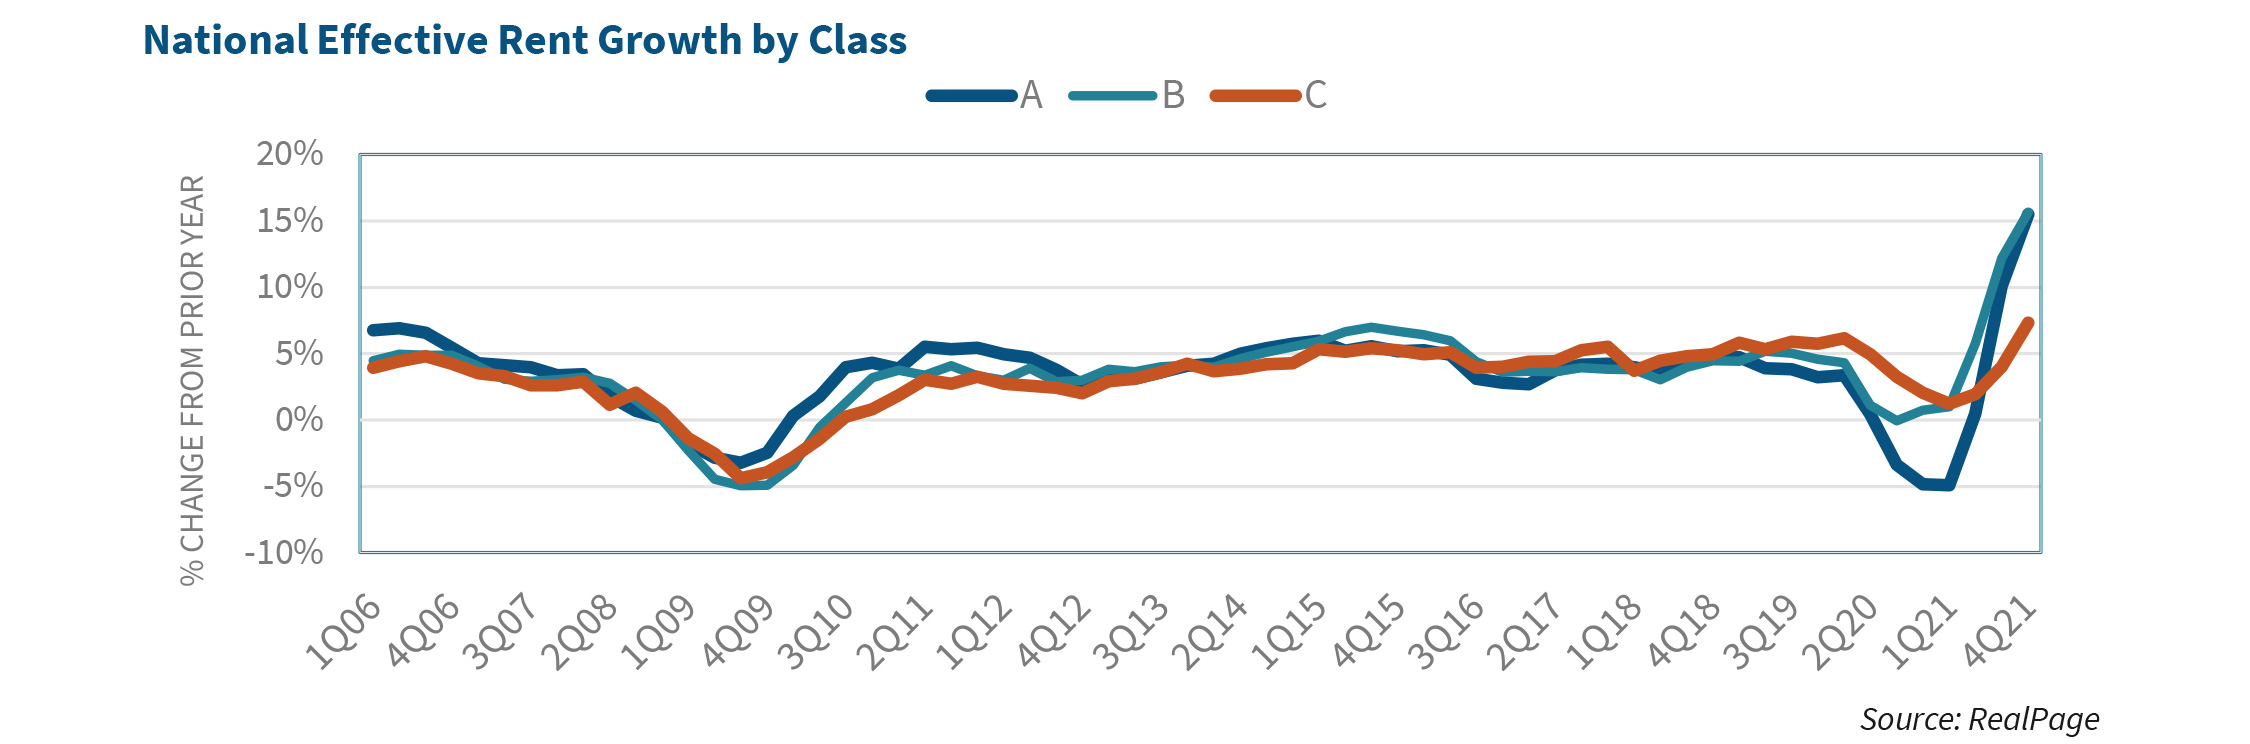 National Effective Rent Growth by Class